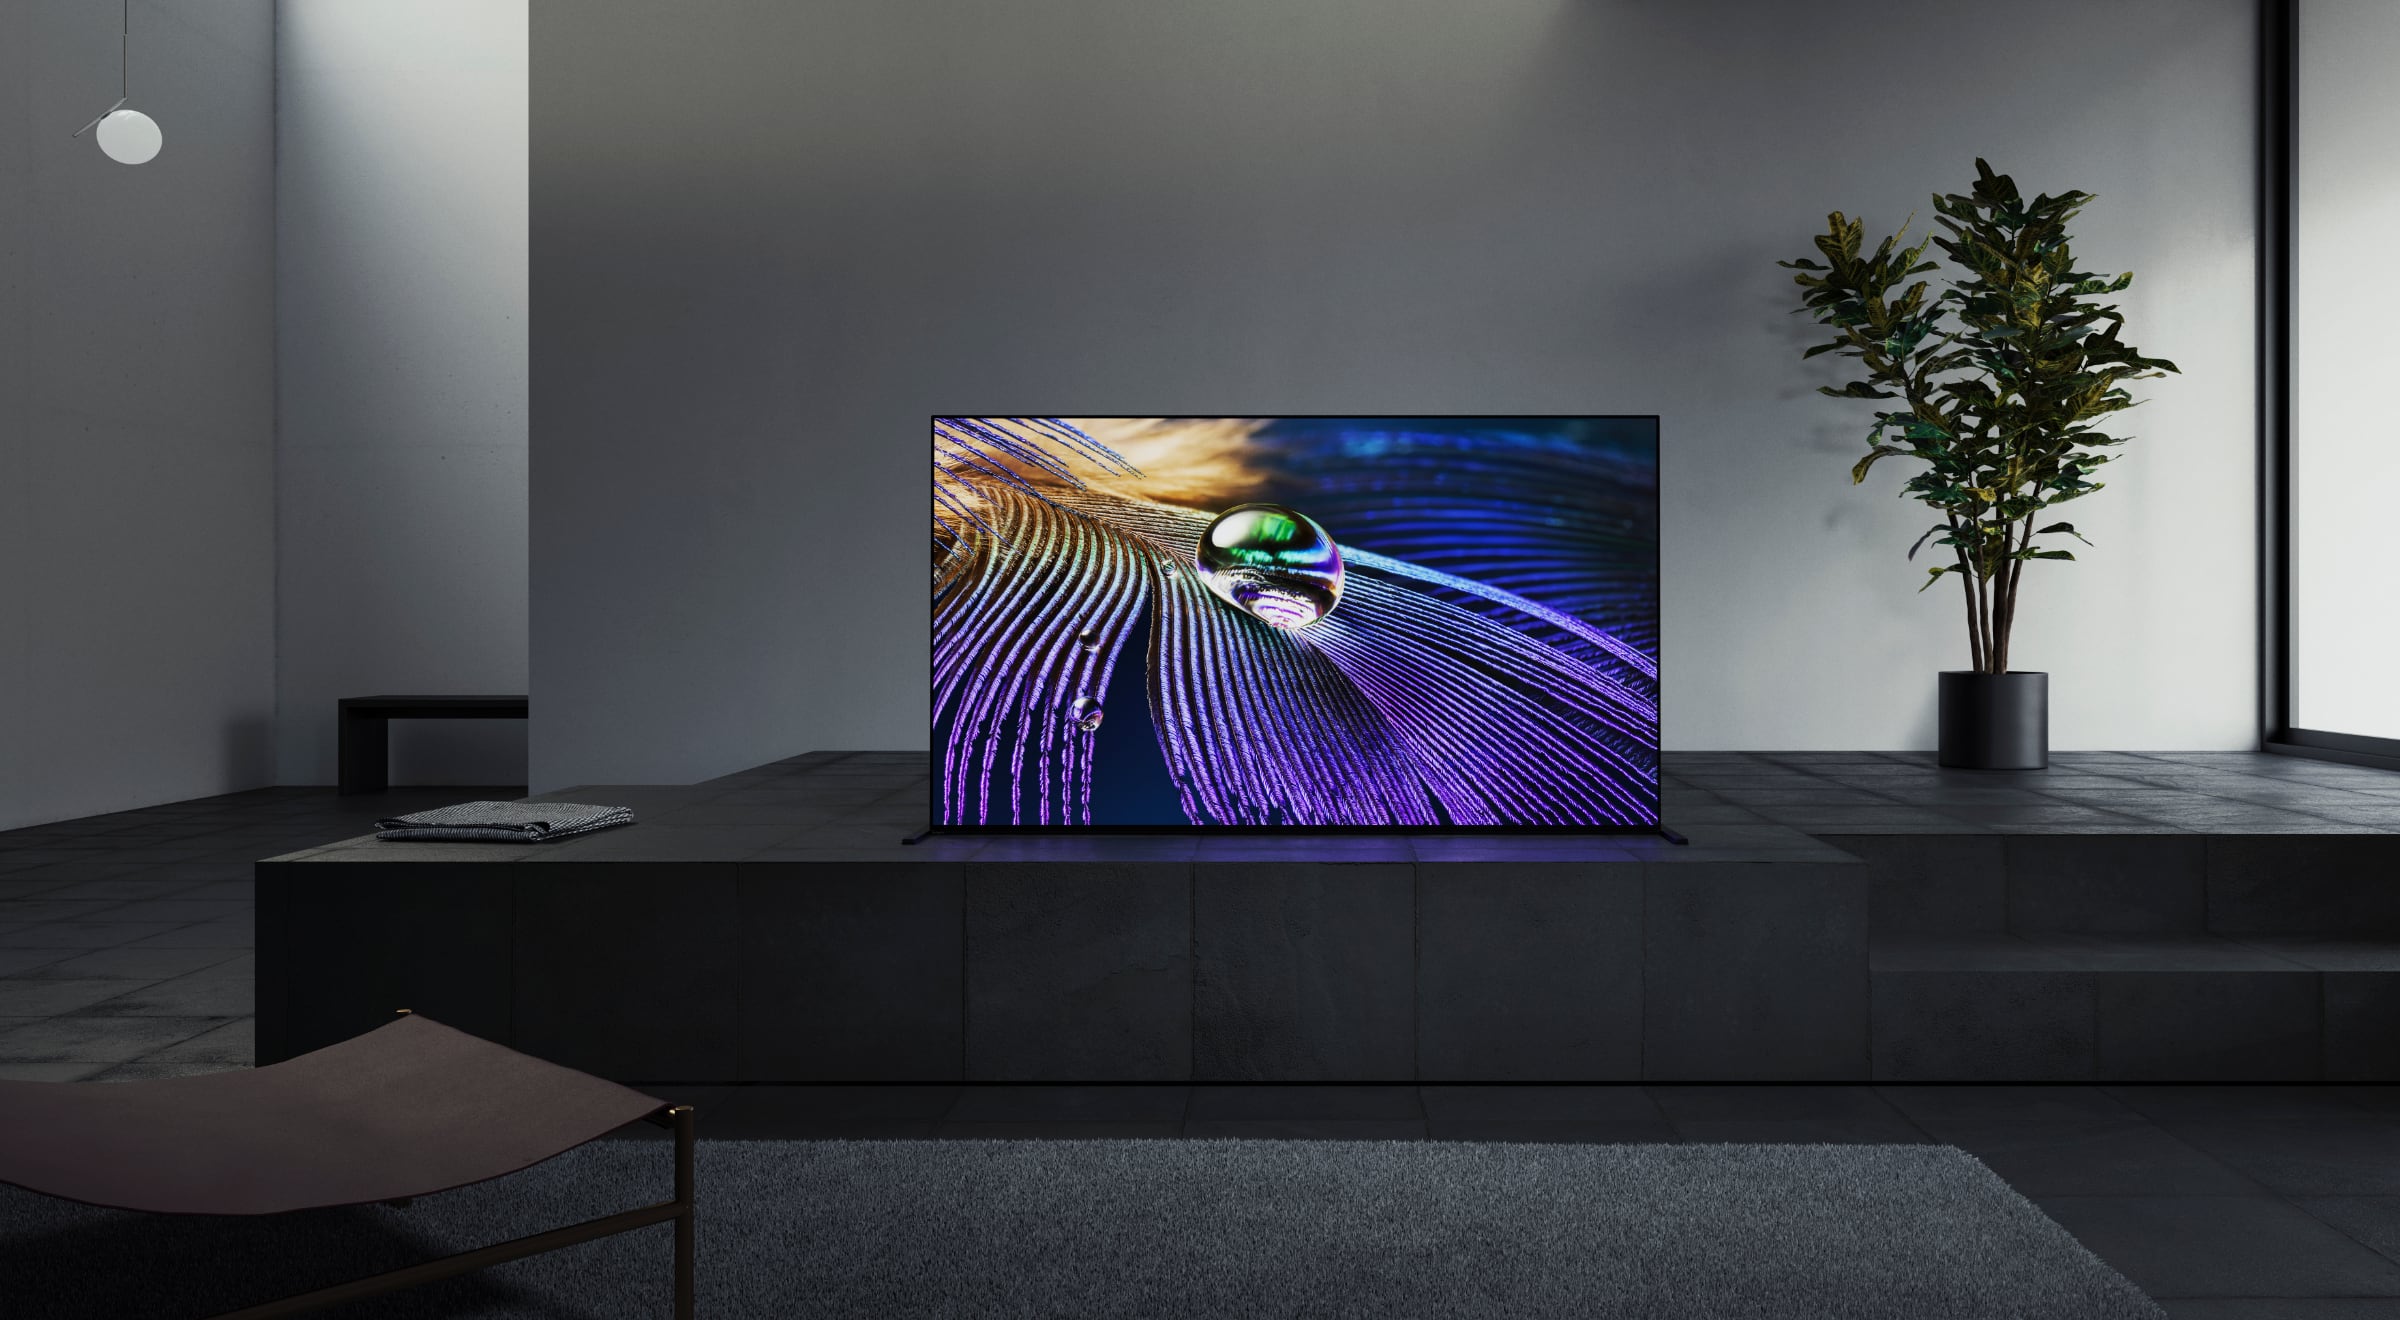 LG announces European pricing and availability for new OLED and QNED Smart  TVs -  News